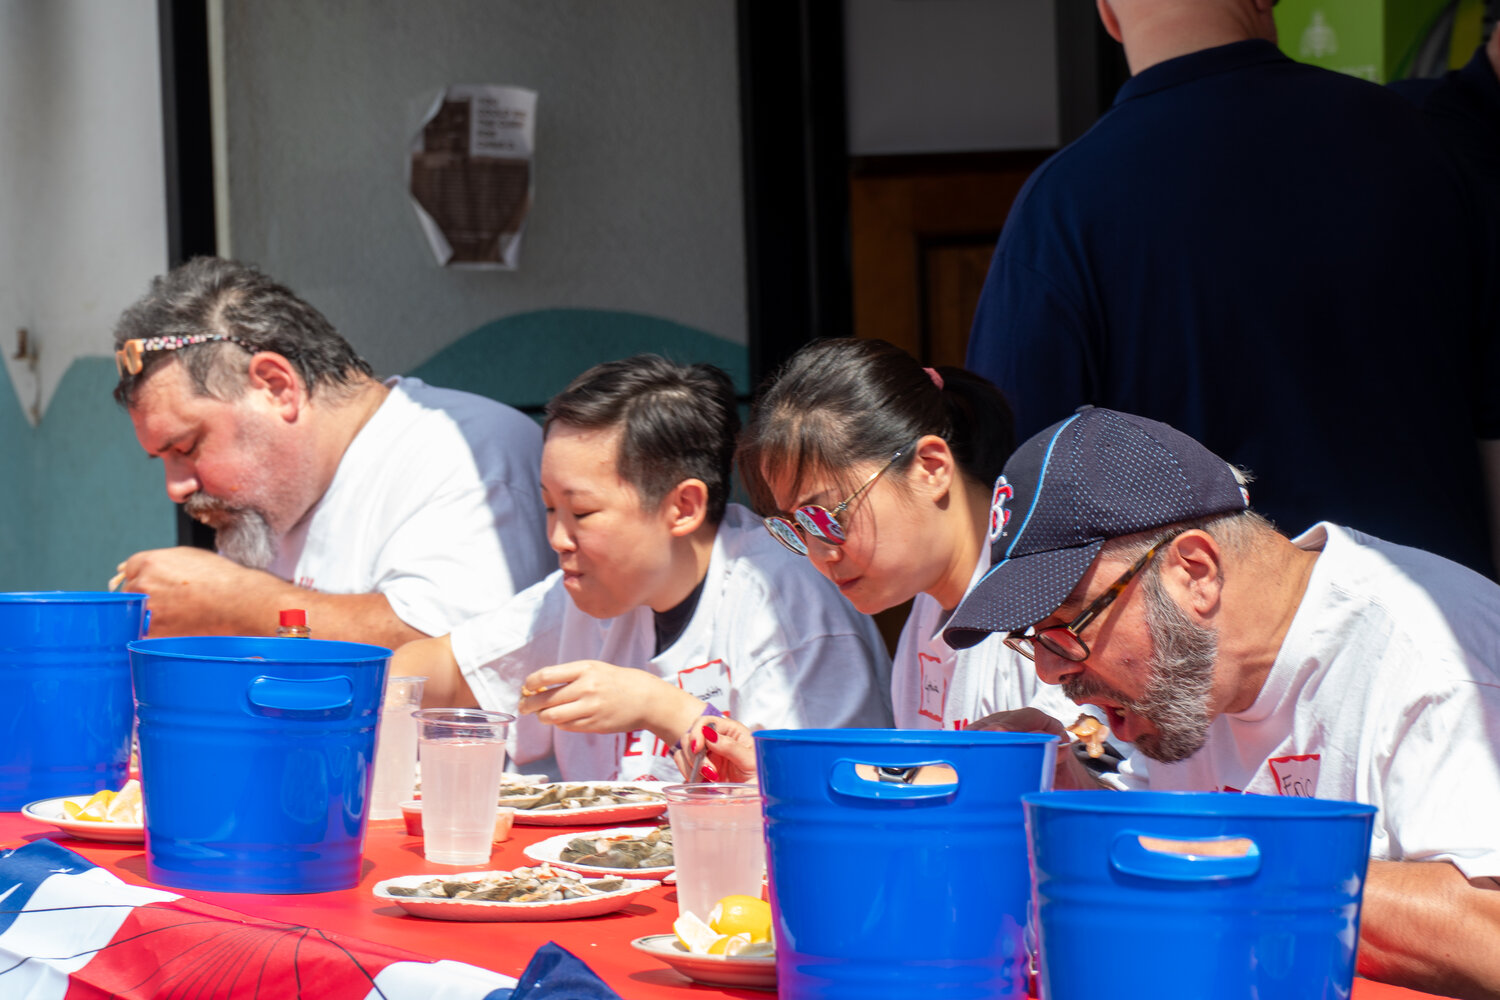 Merchetti, Meredith Wong, Cynthia Lam and Eric Schlittner were focused on clearing full plates.